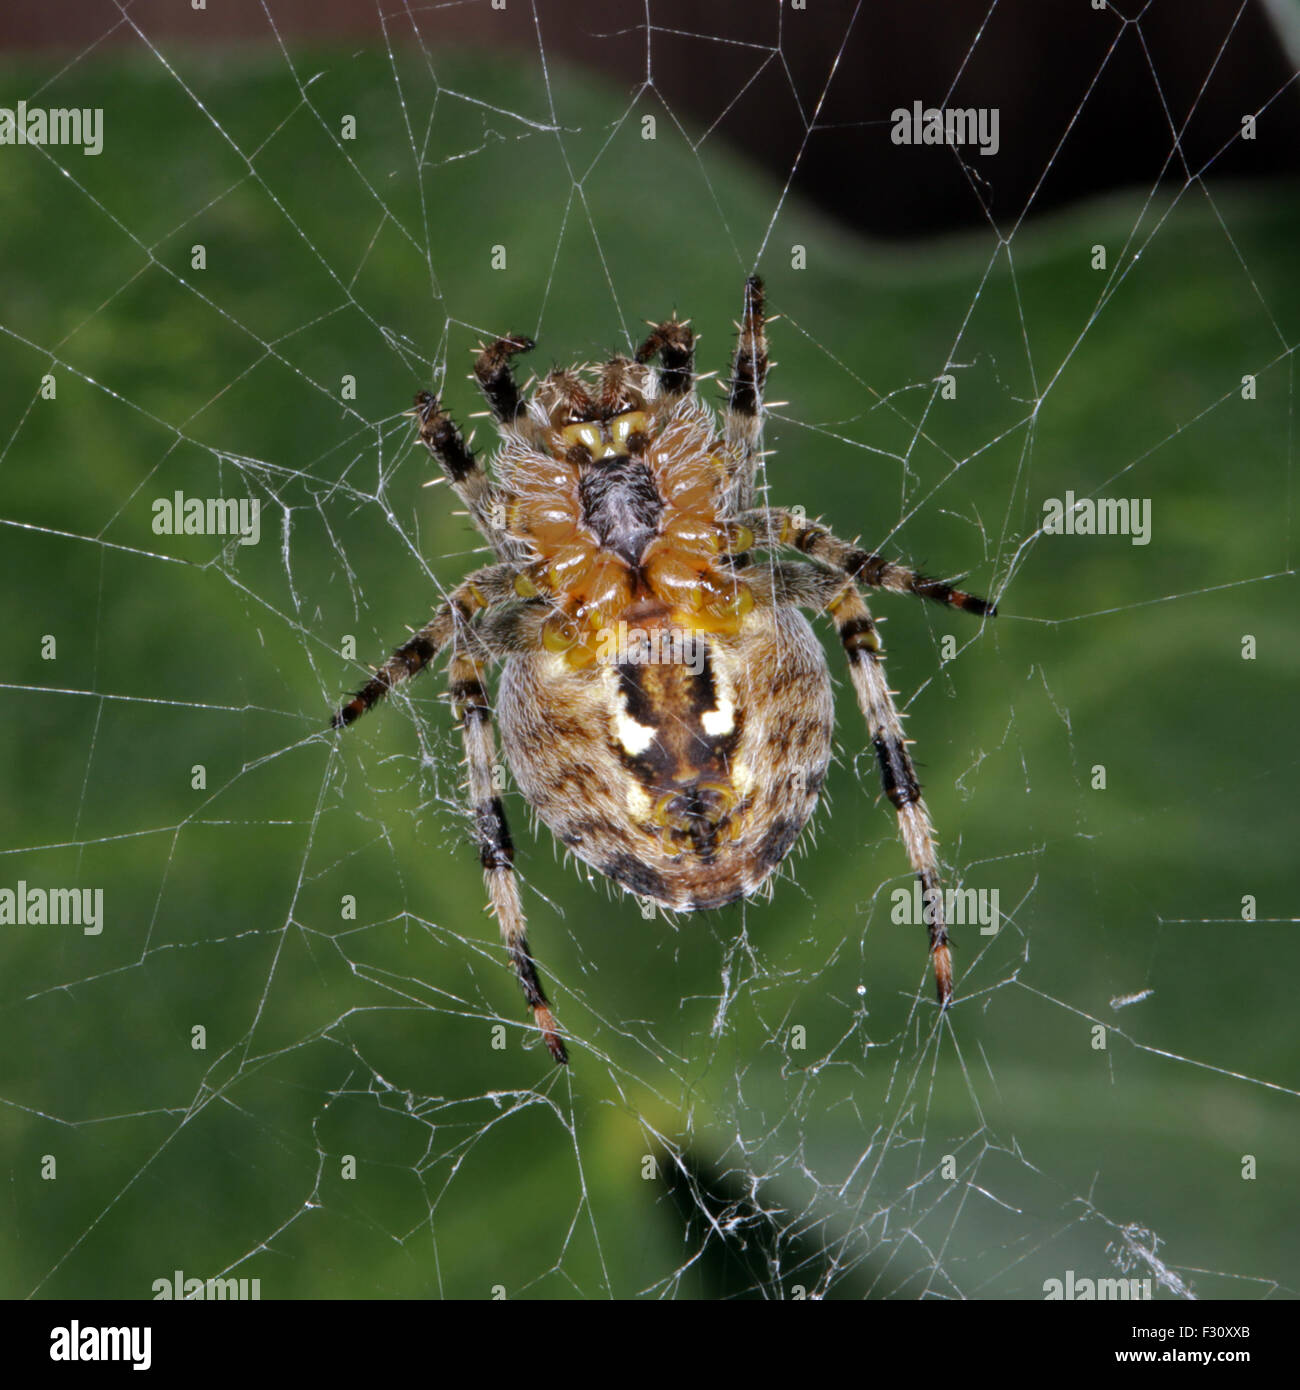 Close-up, macro photo of a spider sitting in its web. Stock Photo